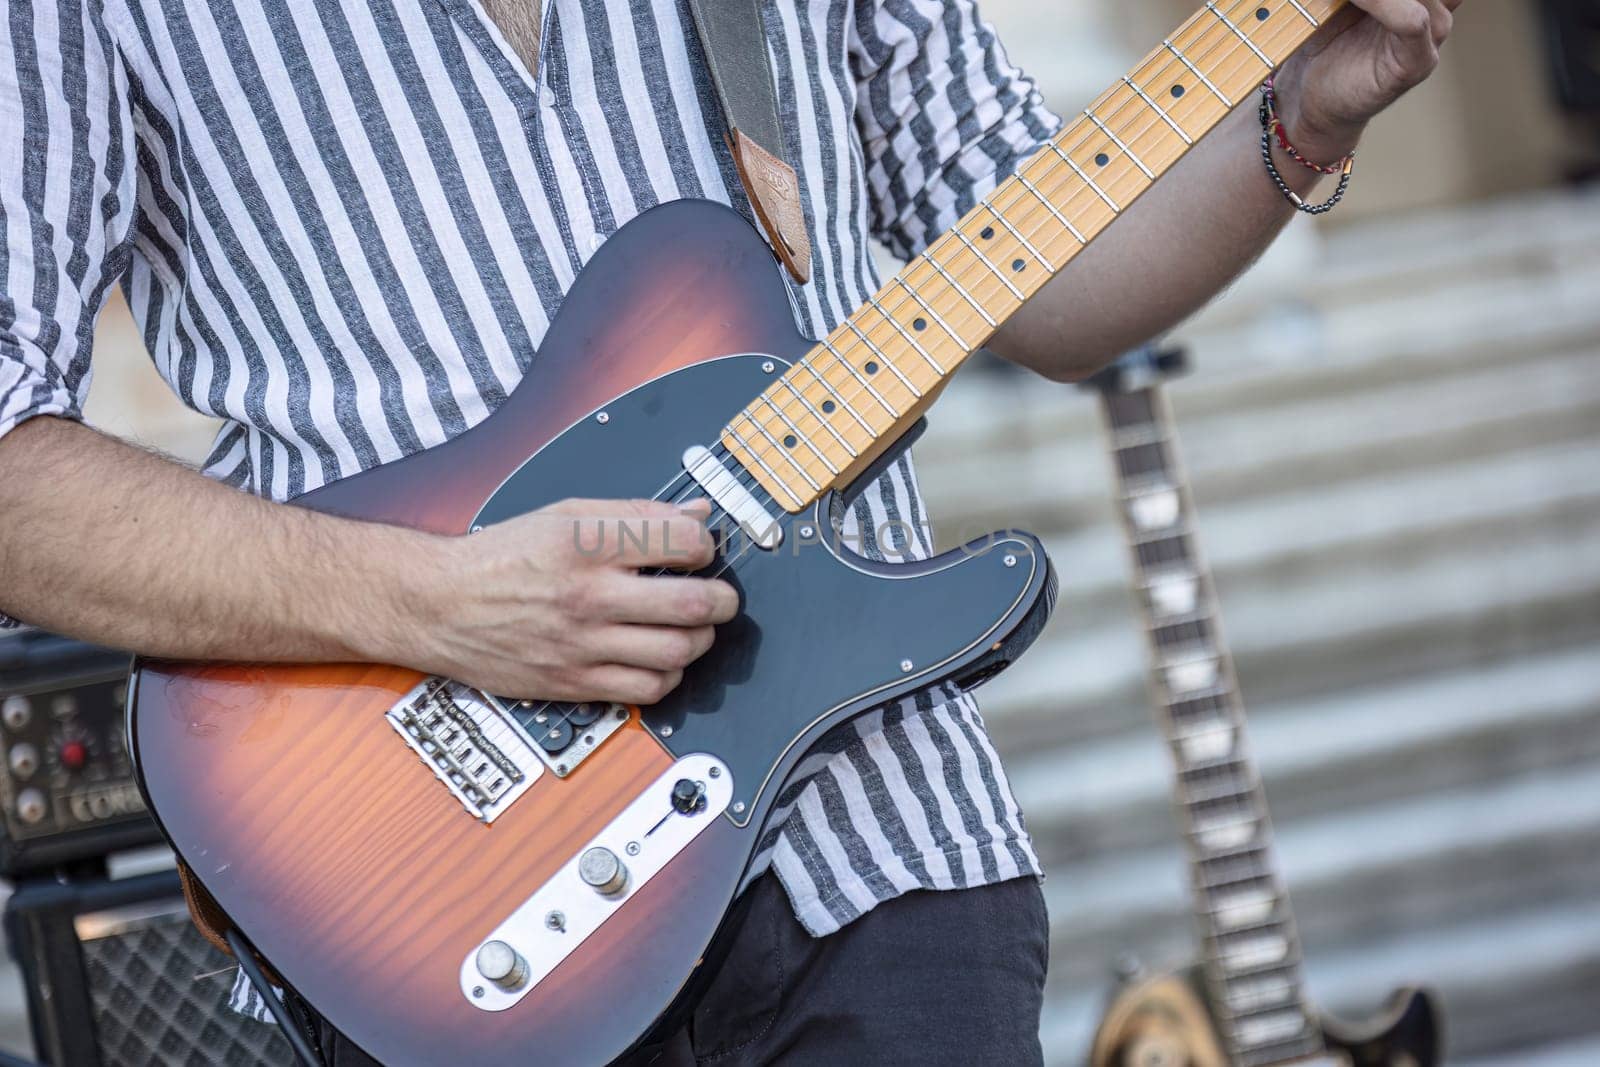 Close-up of a musician's hands playing the guitar during a live daylight performance.